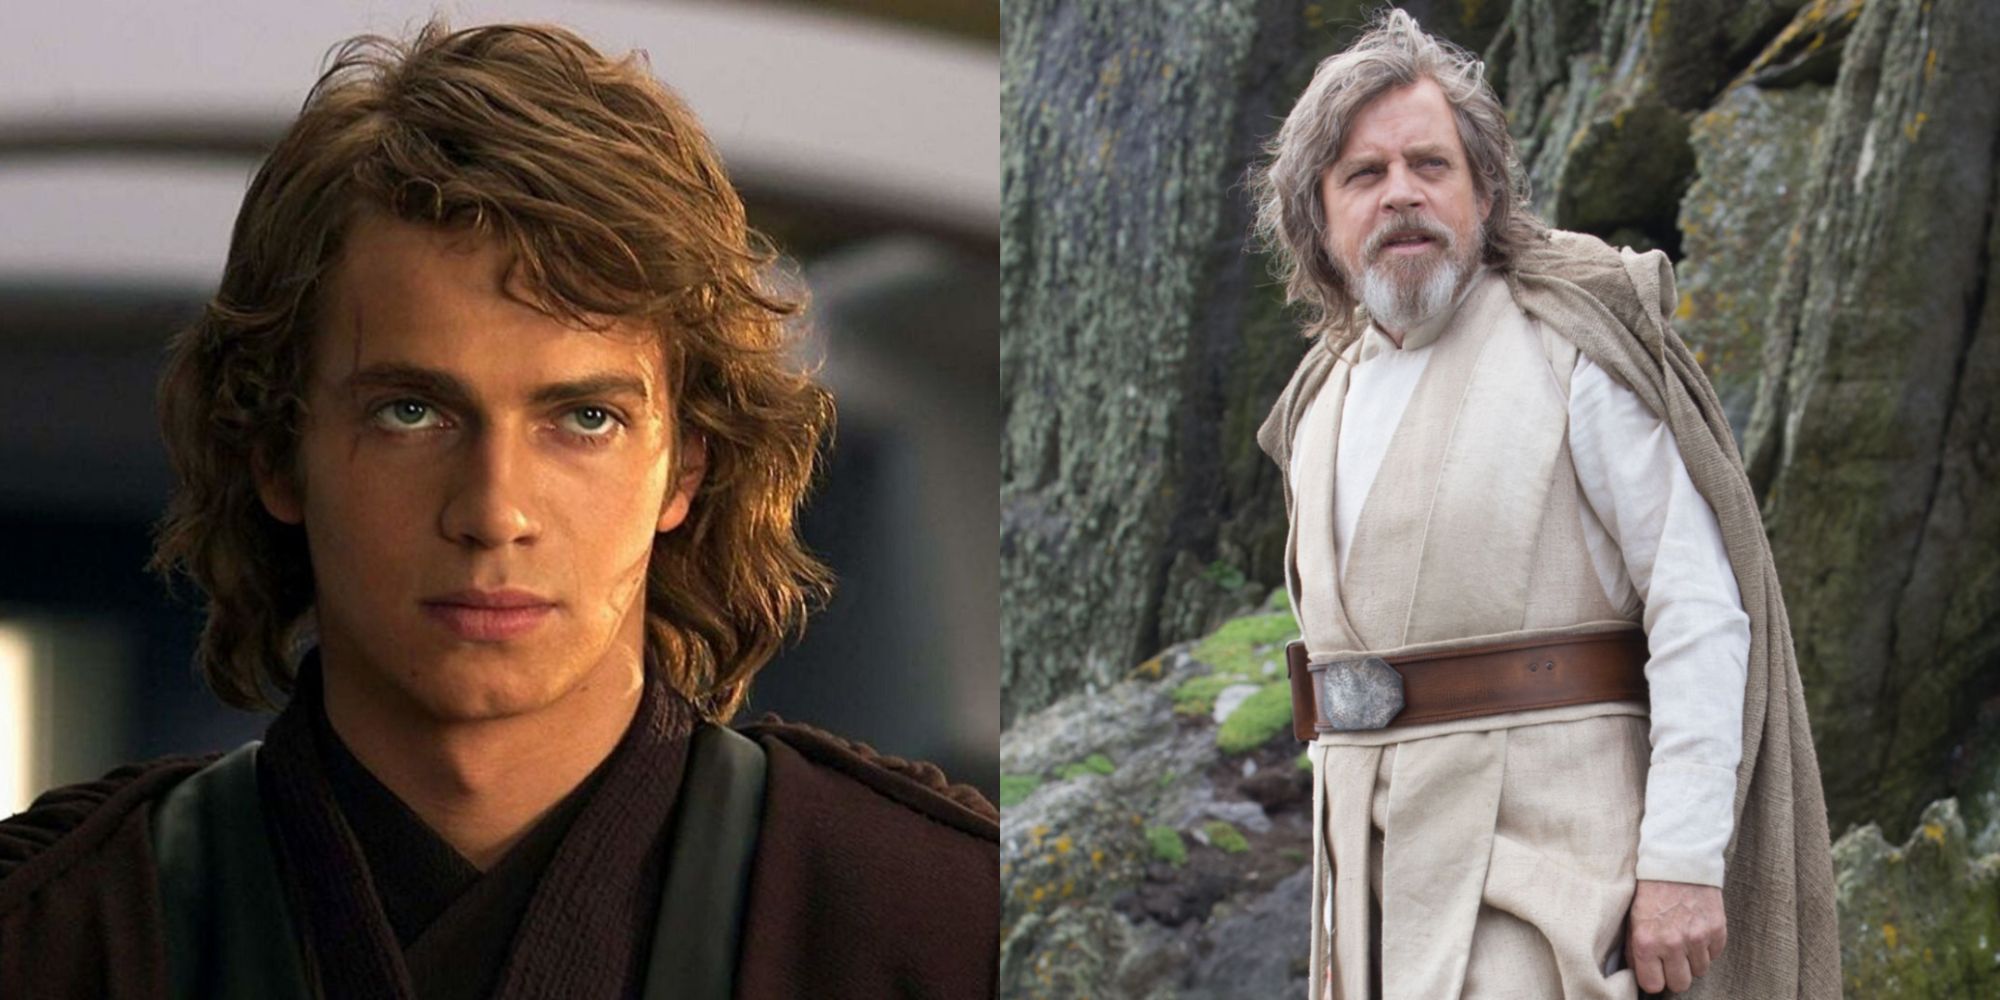 Split image showing Anakin and Liuke Skywalker in Revenge of the Sith and The Last Jedi.